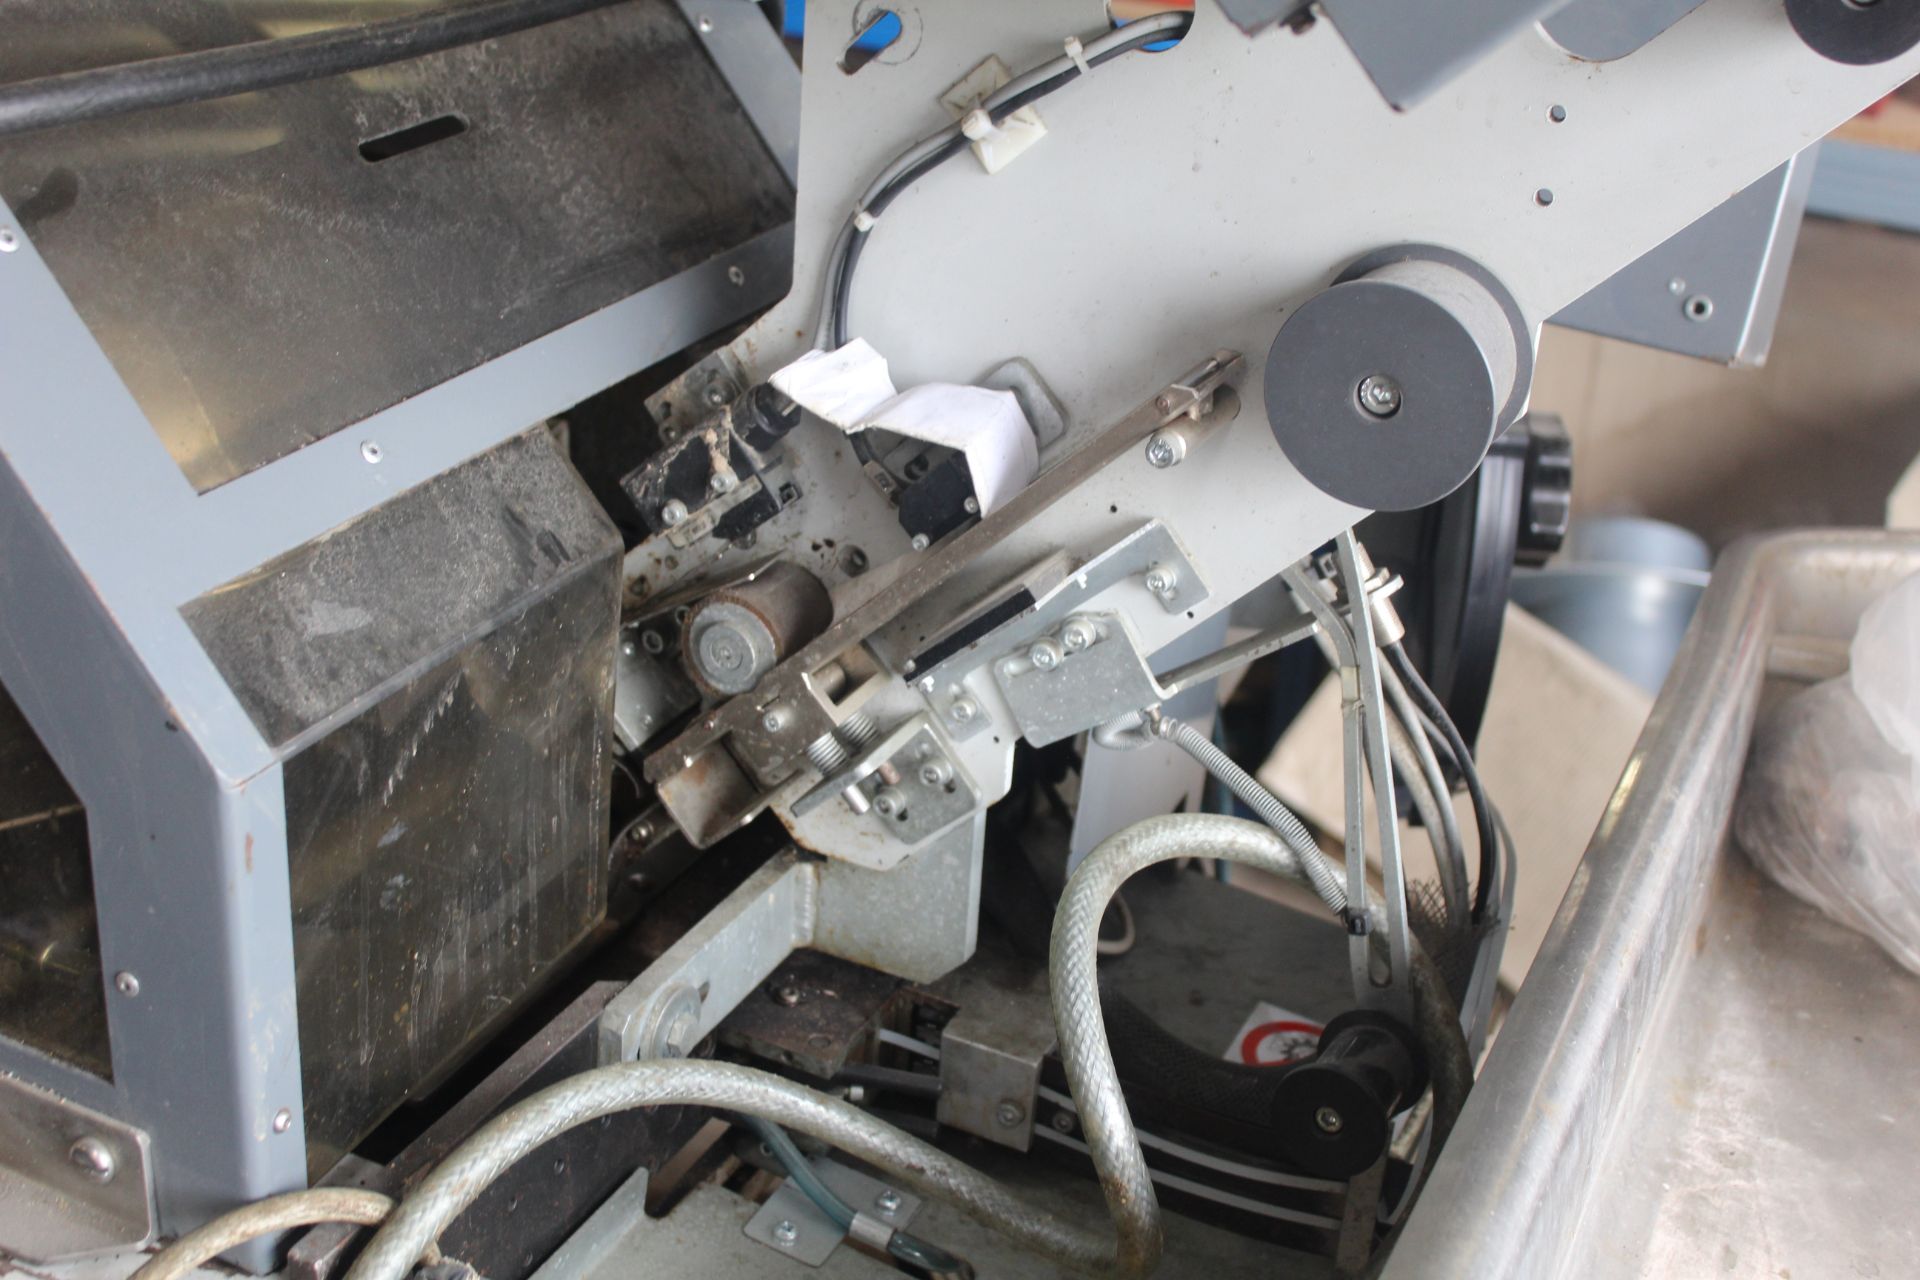 Sorma KB GX 140 produce netting machine. With label printer and output elevator. - Image 26 of 28